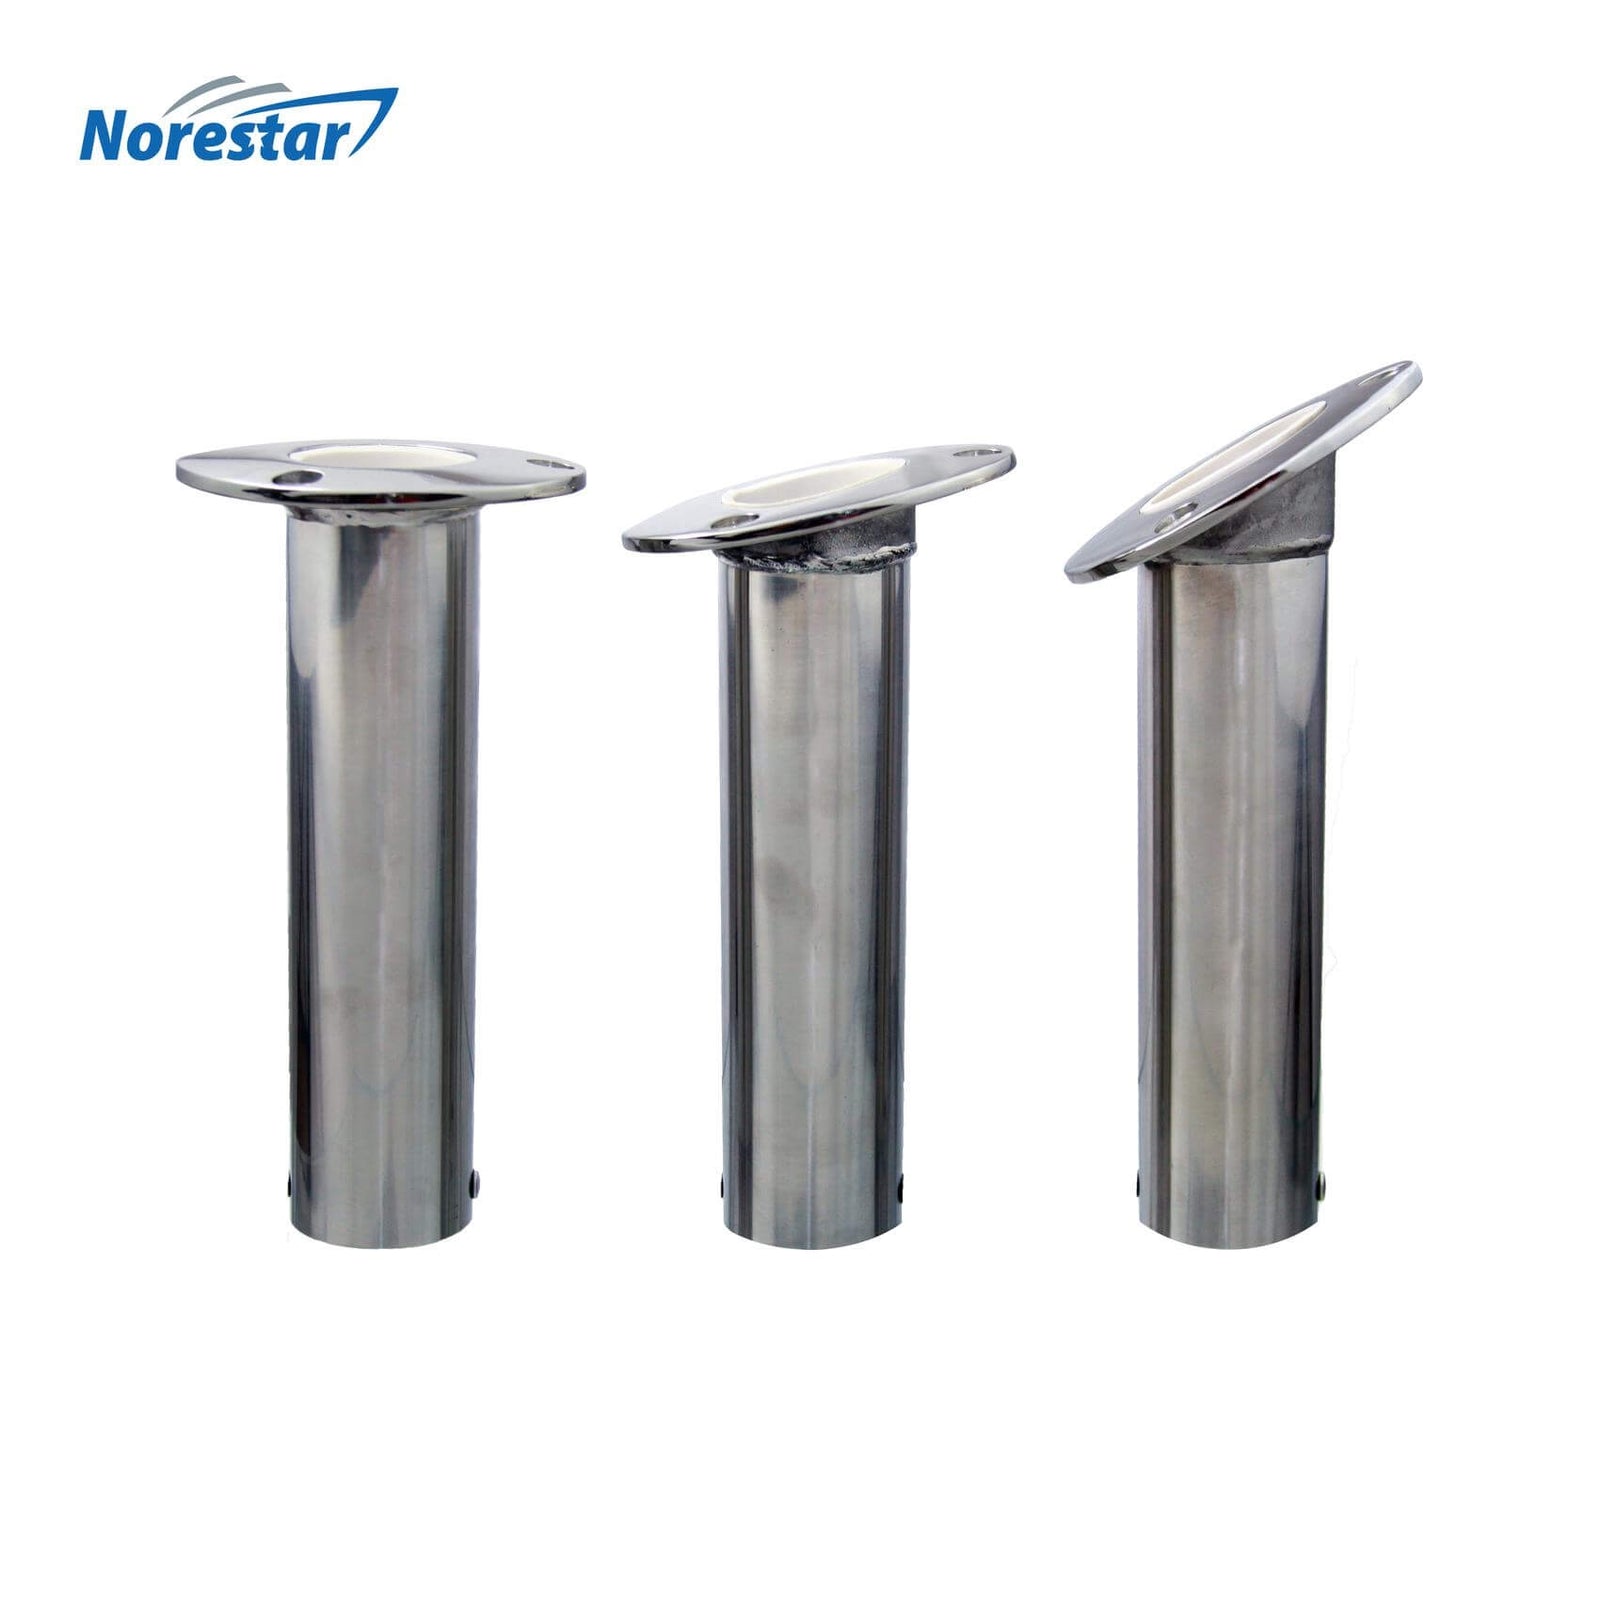 Flush Mounted Stainless Steel Rod Holder, Angle Comparison